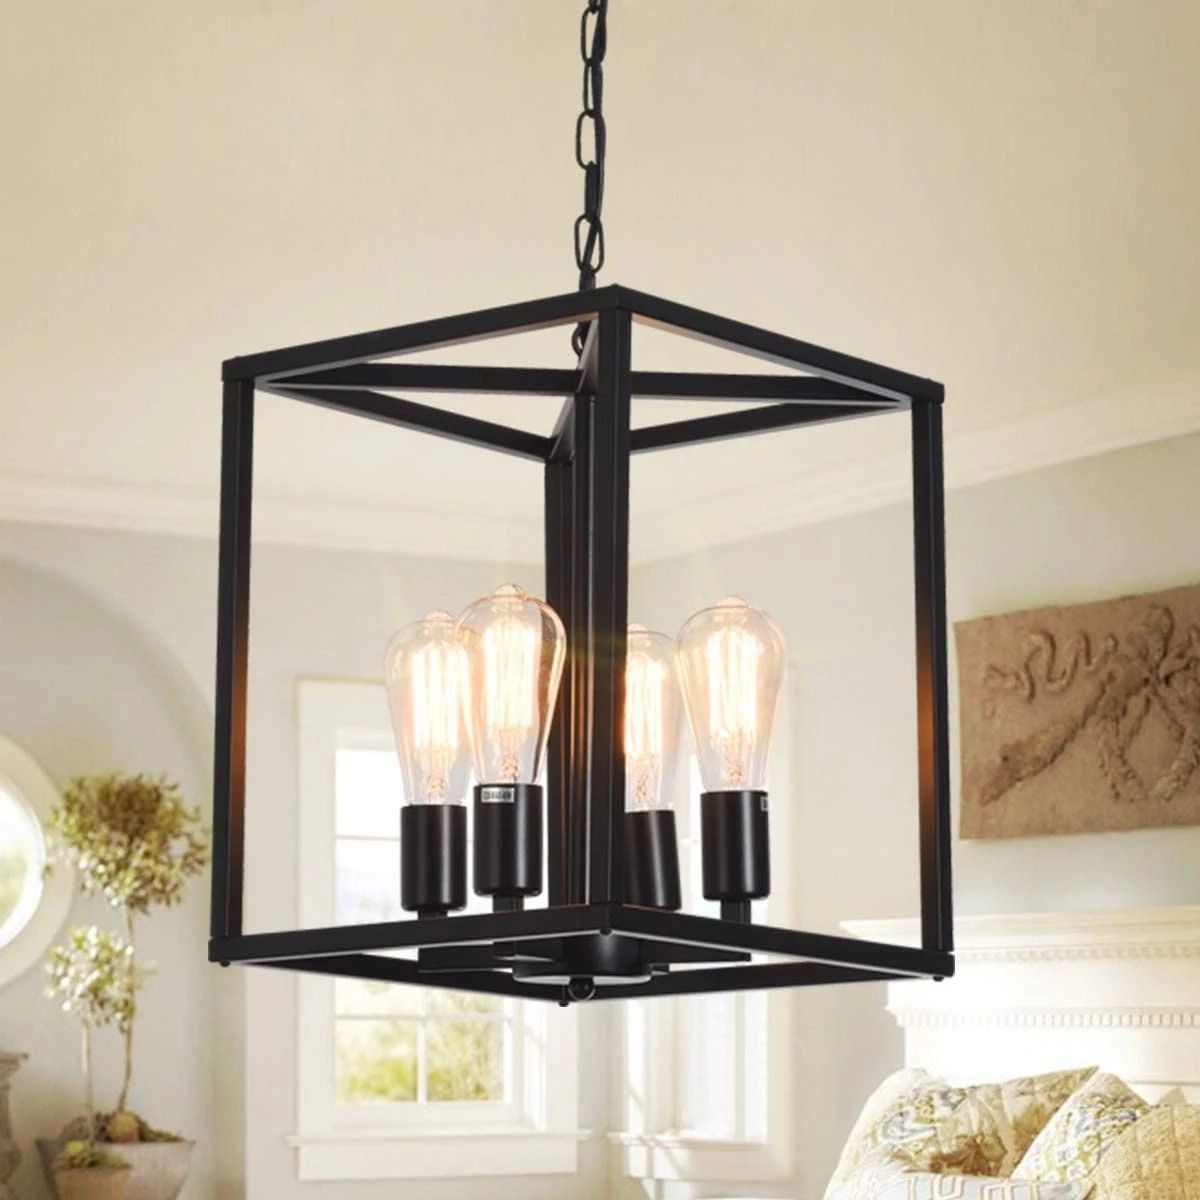 Industrial Metal Lantern Chandeliers 4 Light Adjustable Height Farmhouse  Ceiling Rustic Gold Kitchen Hanging Lighting Fixture – Pendant Lights –  Aliexpress Throughout Black Iron Lantern Chandeliers (View 6 of 15)